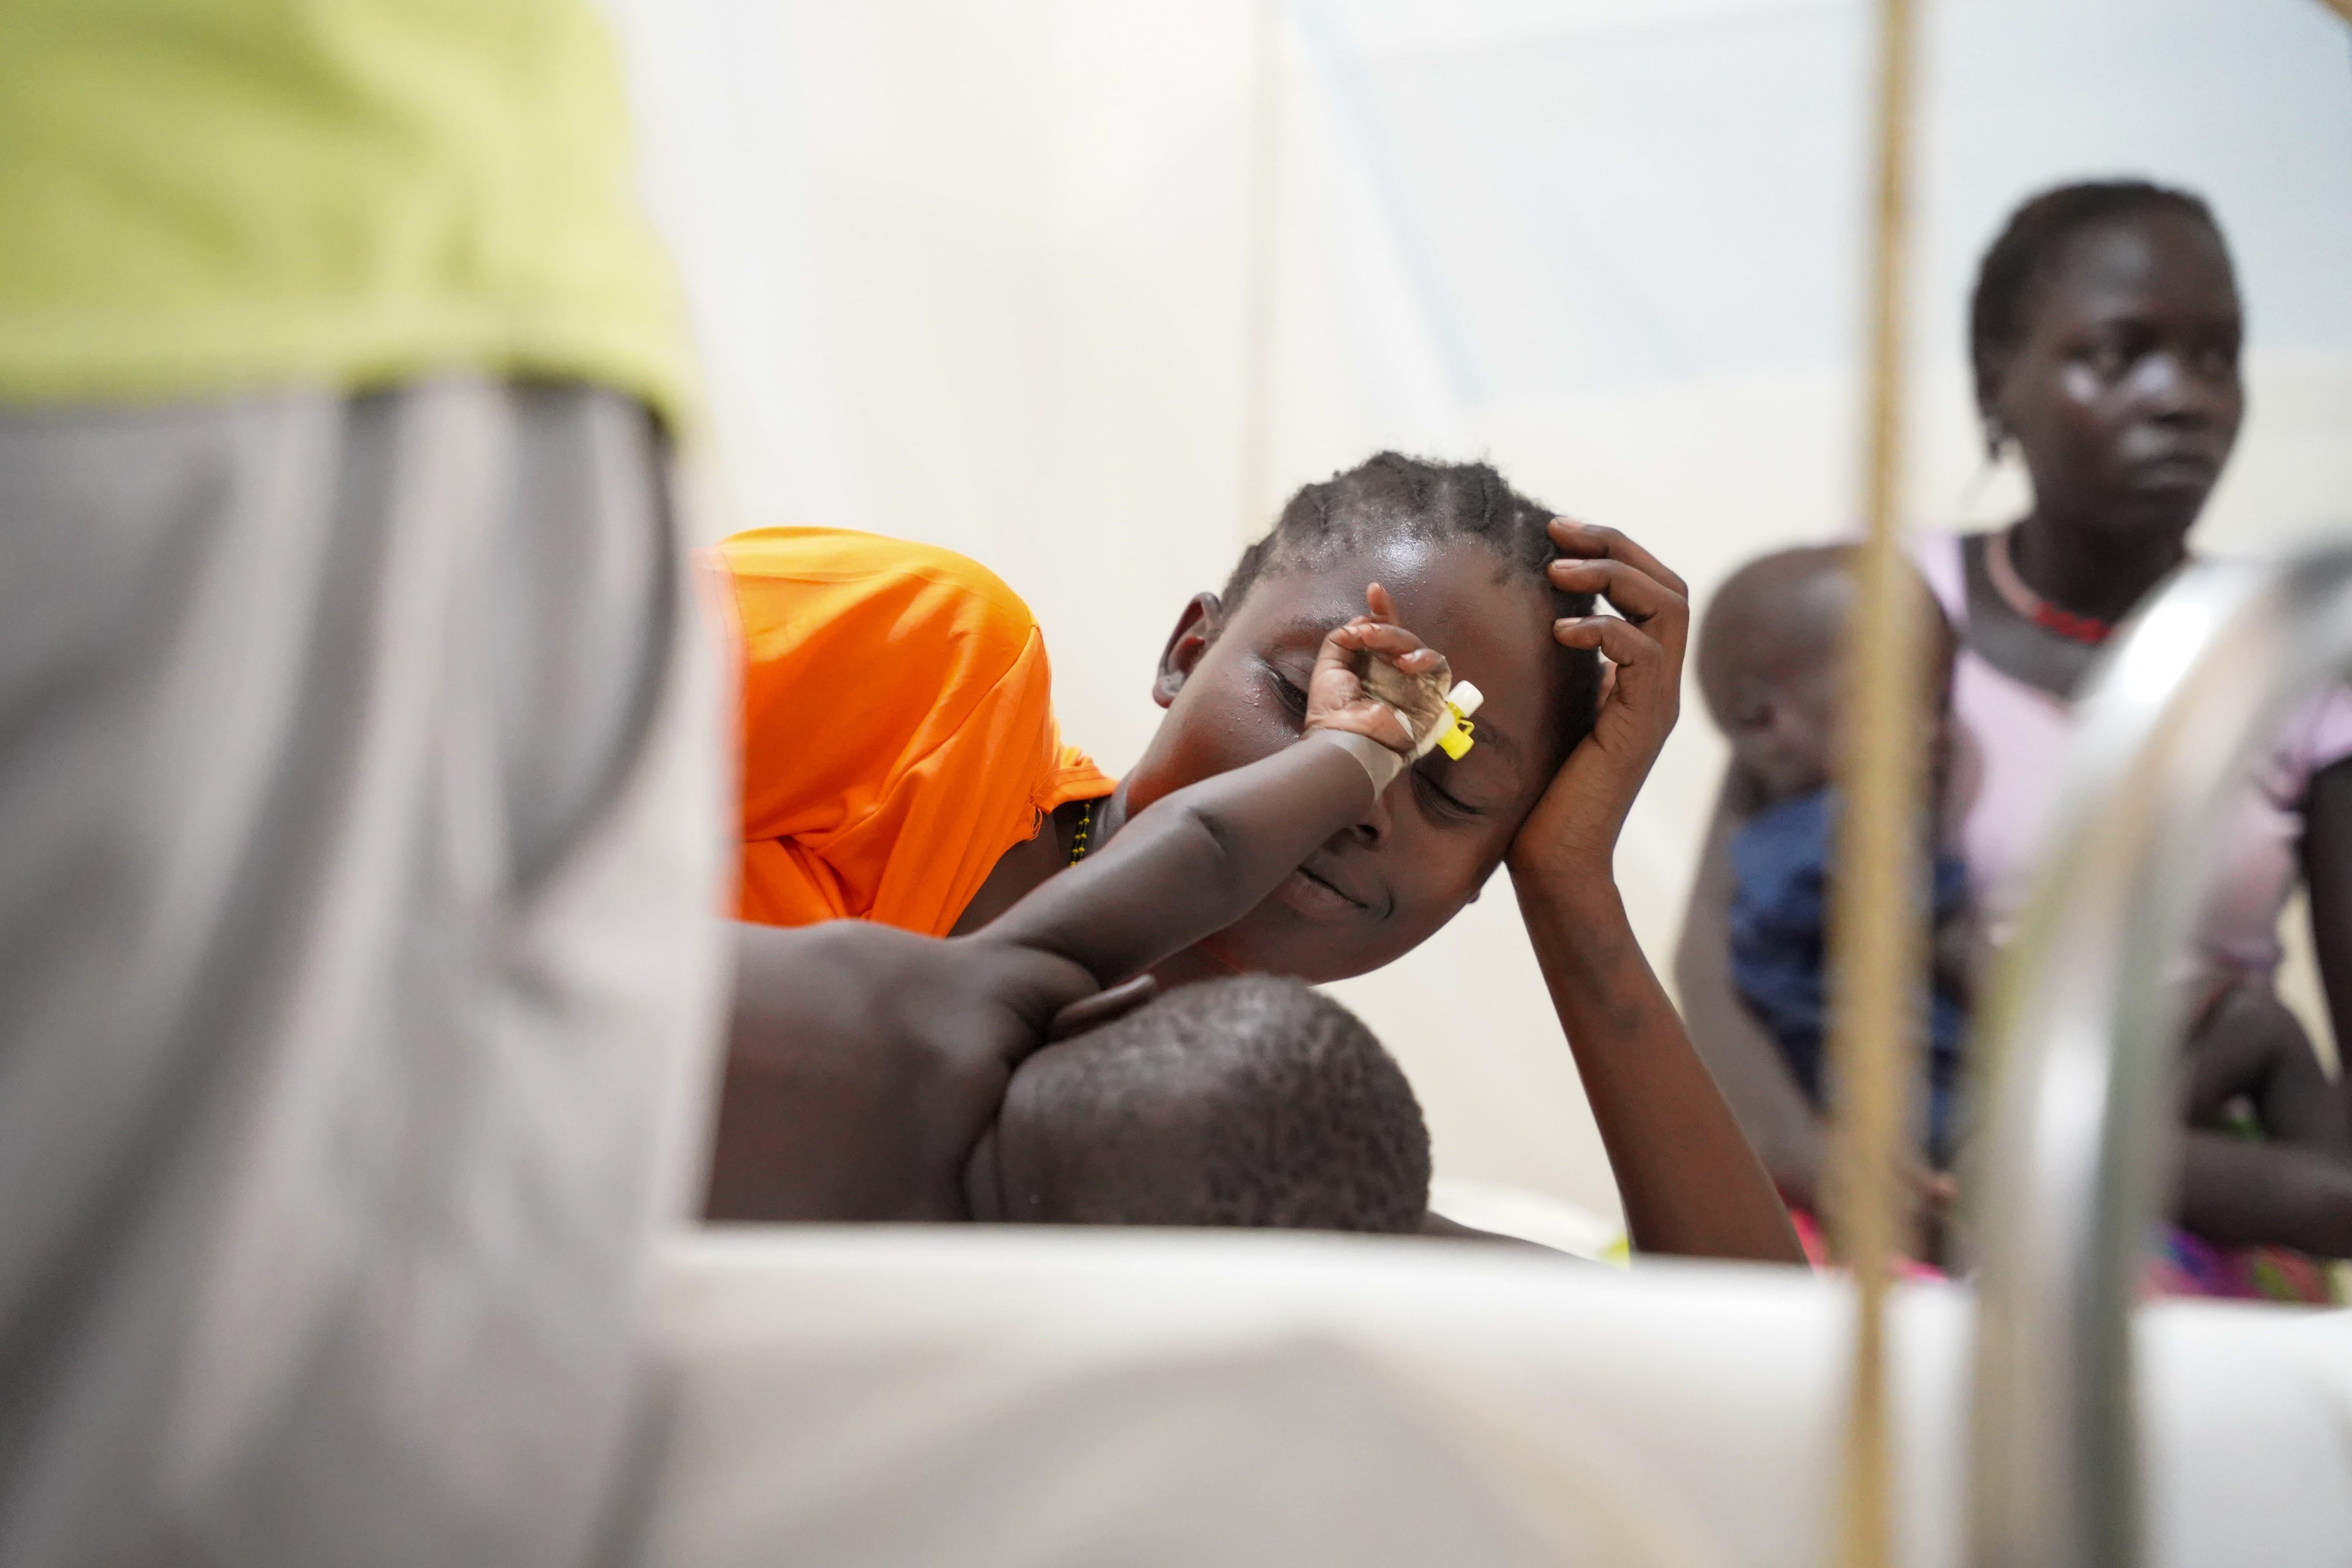 Cattle Keepers in South Sudan: Agut Nyilim plays with her 9-month-old baby boy while he is treated at the MSF-supported inpatient ward for children under 5 years, in Boma primary healthcare centre, Greater Pibor Administrative Area.